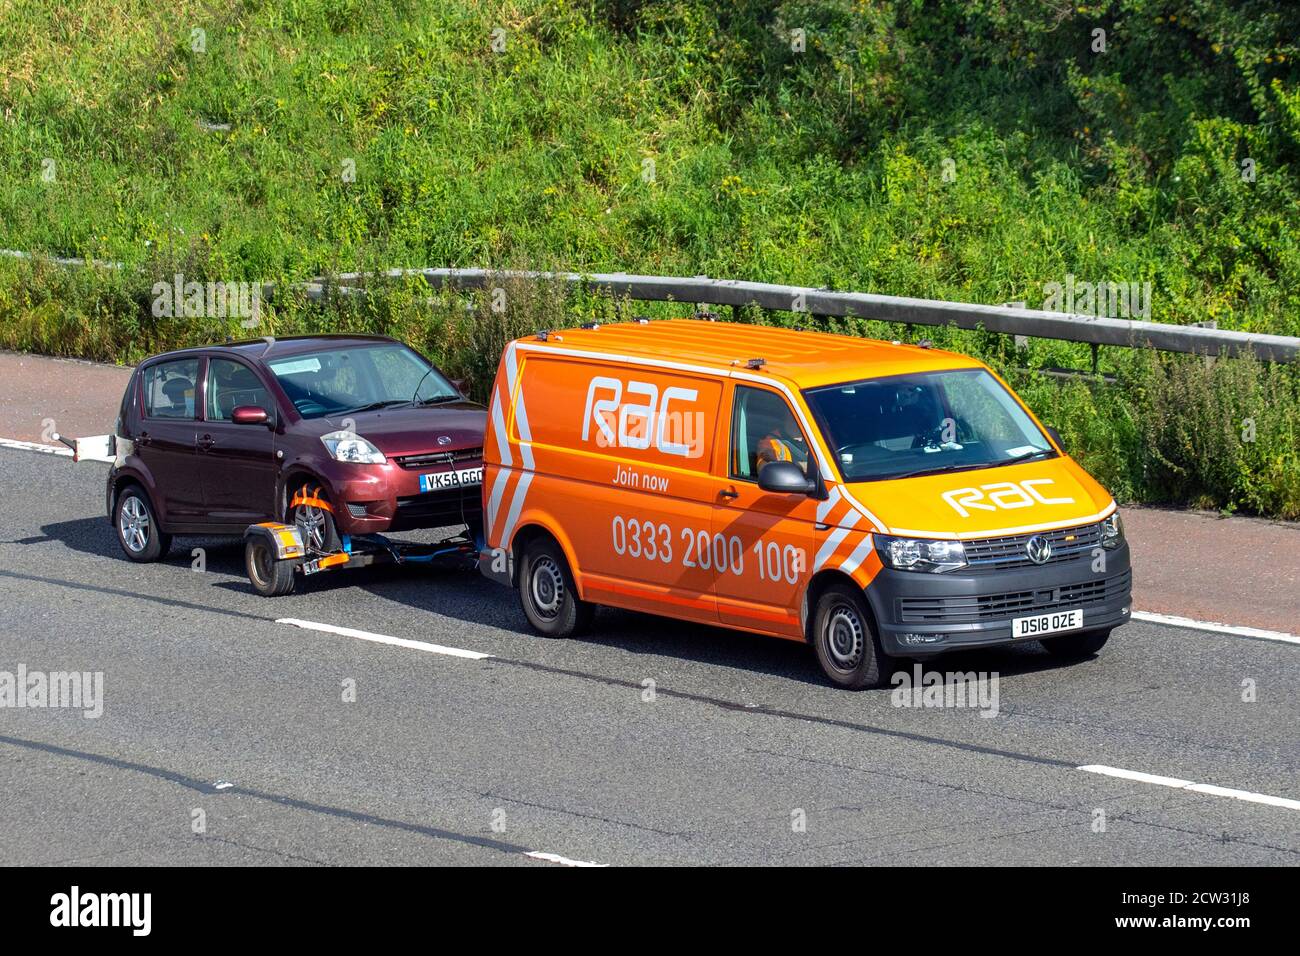 RAC towing car trailer breakdown van, Classic car roadside assistance,  delivery trucks, haulage, lorry, transportation, truck towing Daihatsu Sirion SE car, VW Vollkswagen transporter,  24hr vehicle recovery, delivery, transport industry, vehicle freight, on the M6 at Lancaster, UK Stock Photo